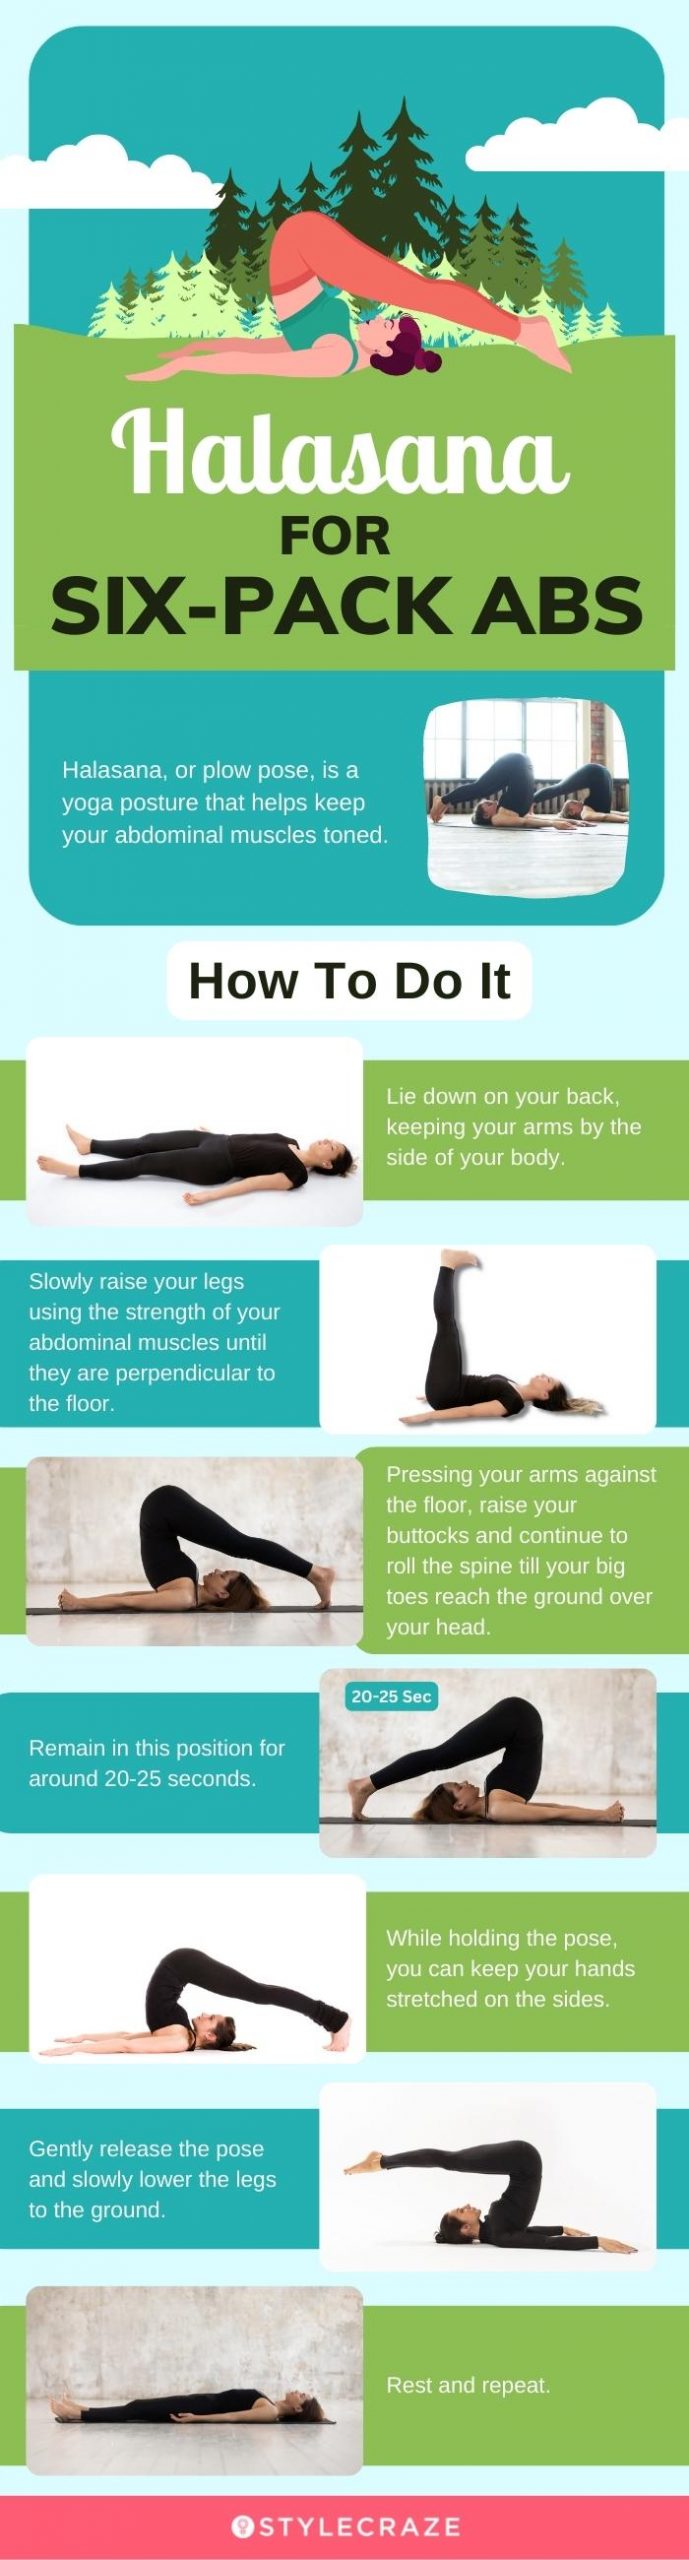 halasana for six pack abs[infographic]